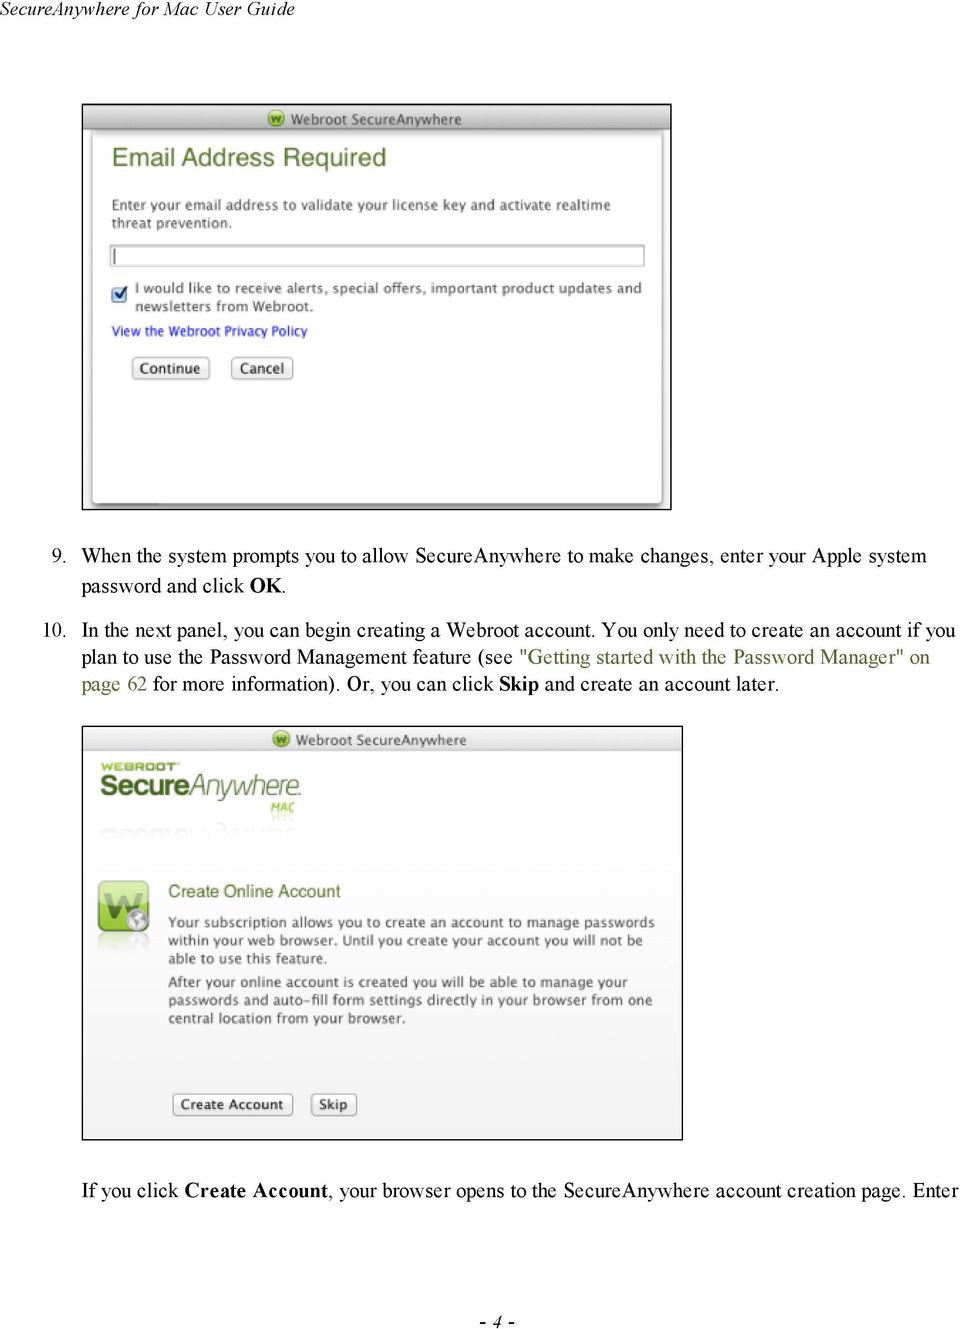 In the next panel, you can begin creating a Webroot account.